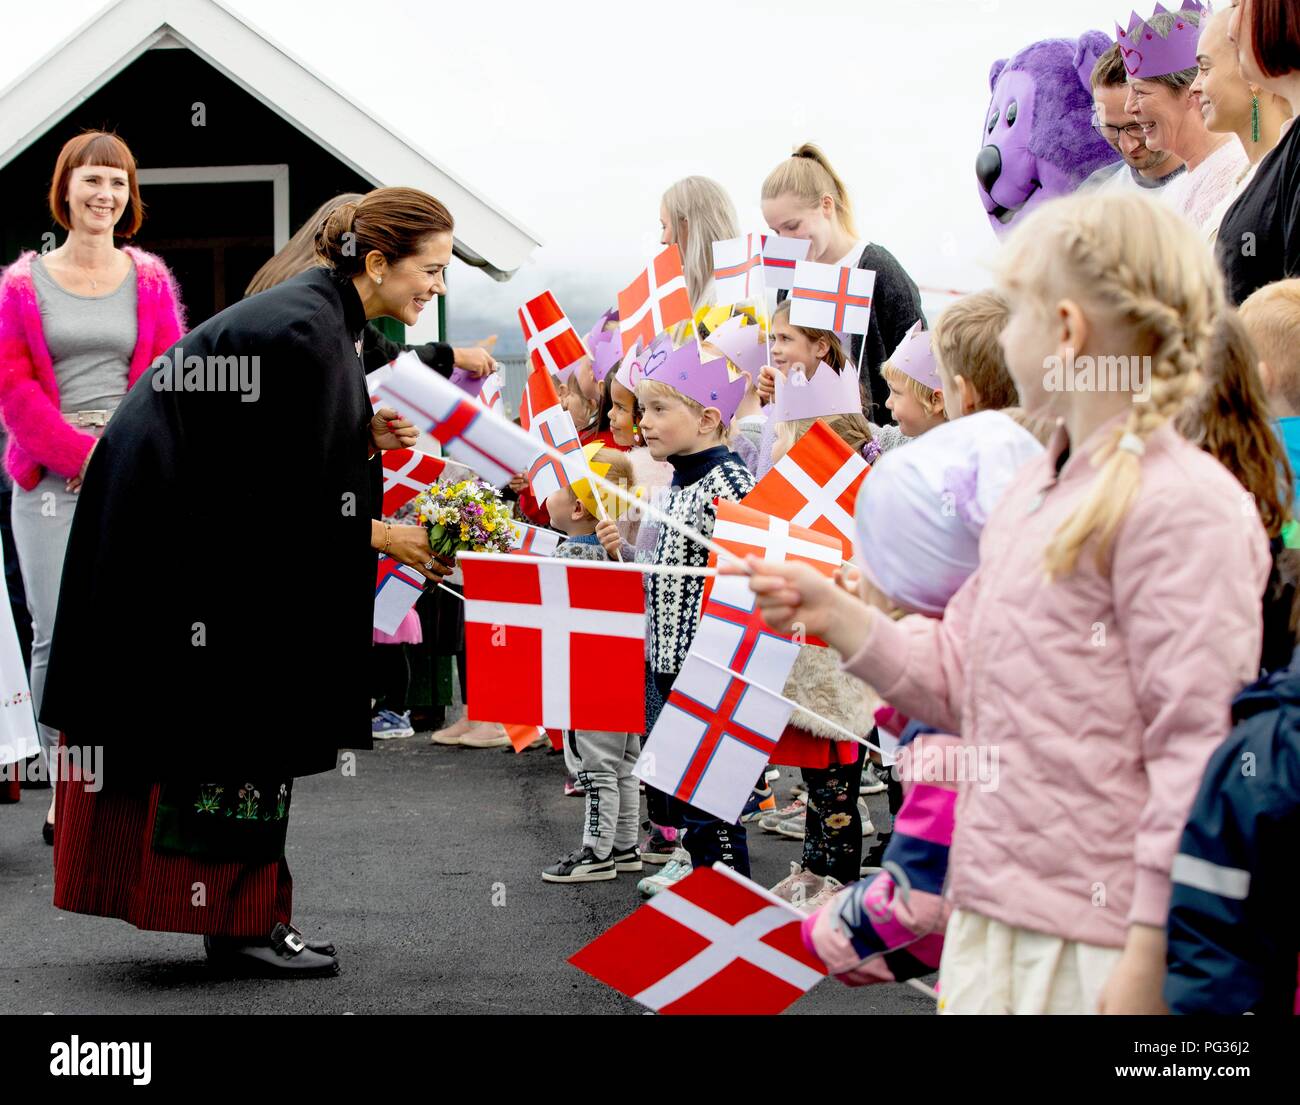 Torshavn, Faroe Islands, Denmark. 23rd Aug, 2018. Crown Princess Mary of Denmark at Torshavn, on August 23, 2018, to visit the school á Argjahamri, on the 1st of the 4 days visit to the Faroe Islands Photo : Albert Nieboer/ Netherlands OUT/Point de Vue OUT | Credit: dpa/Alamy Live News Stock Photo